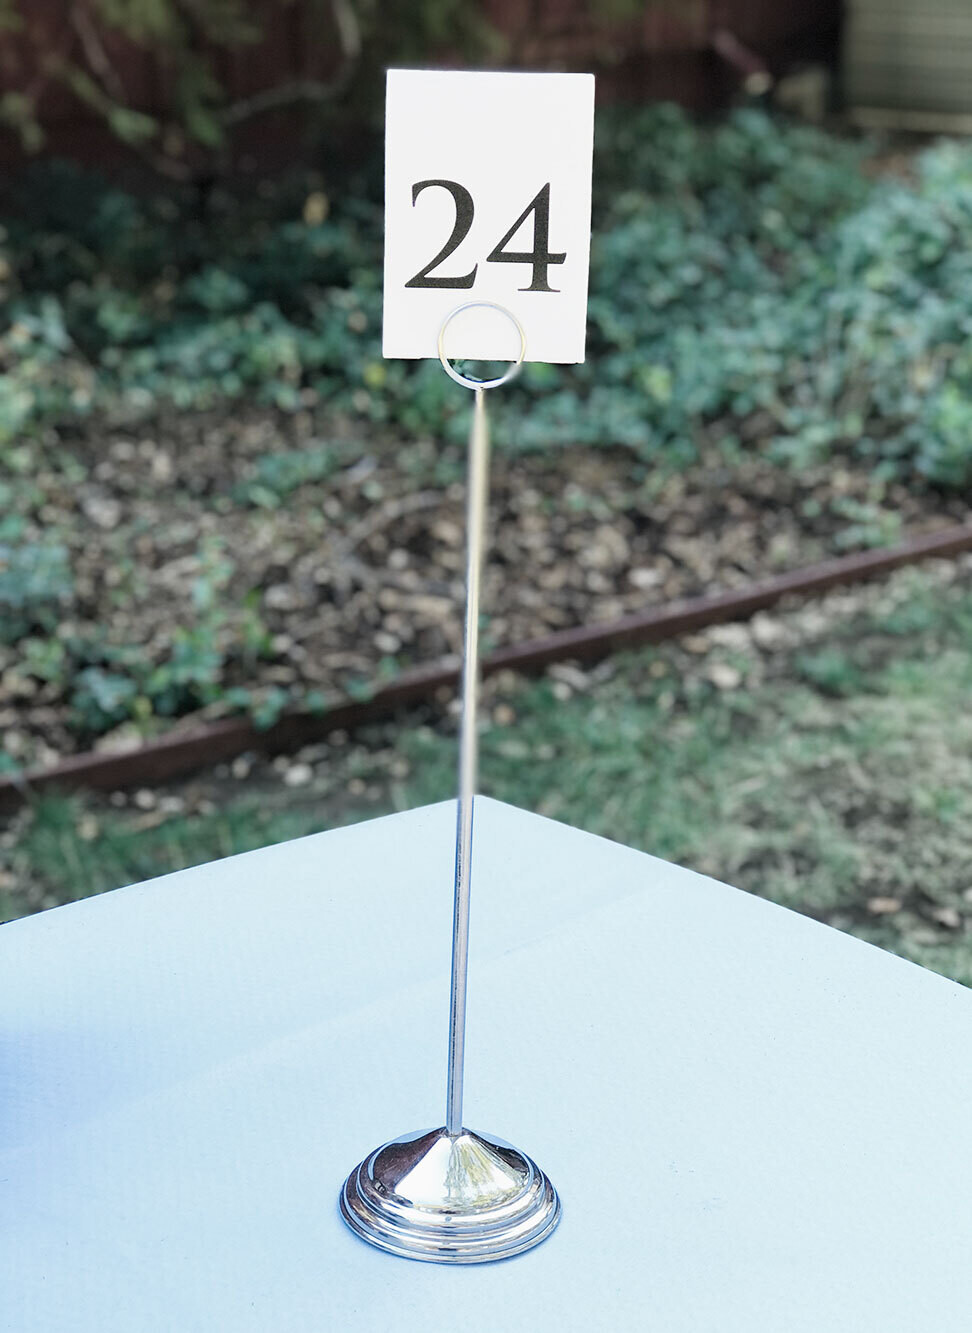 Tall Silver Table Number Holder